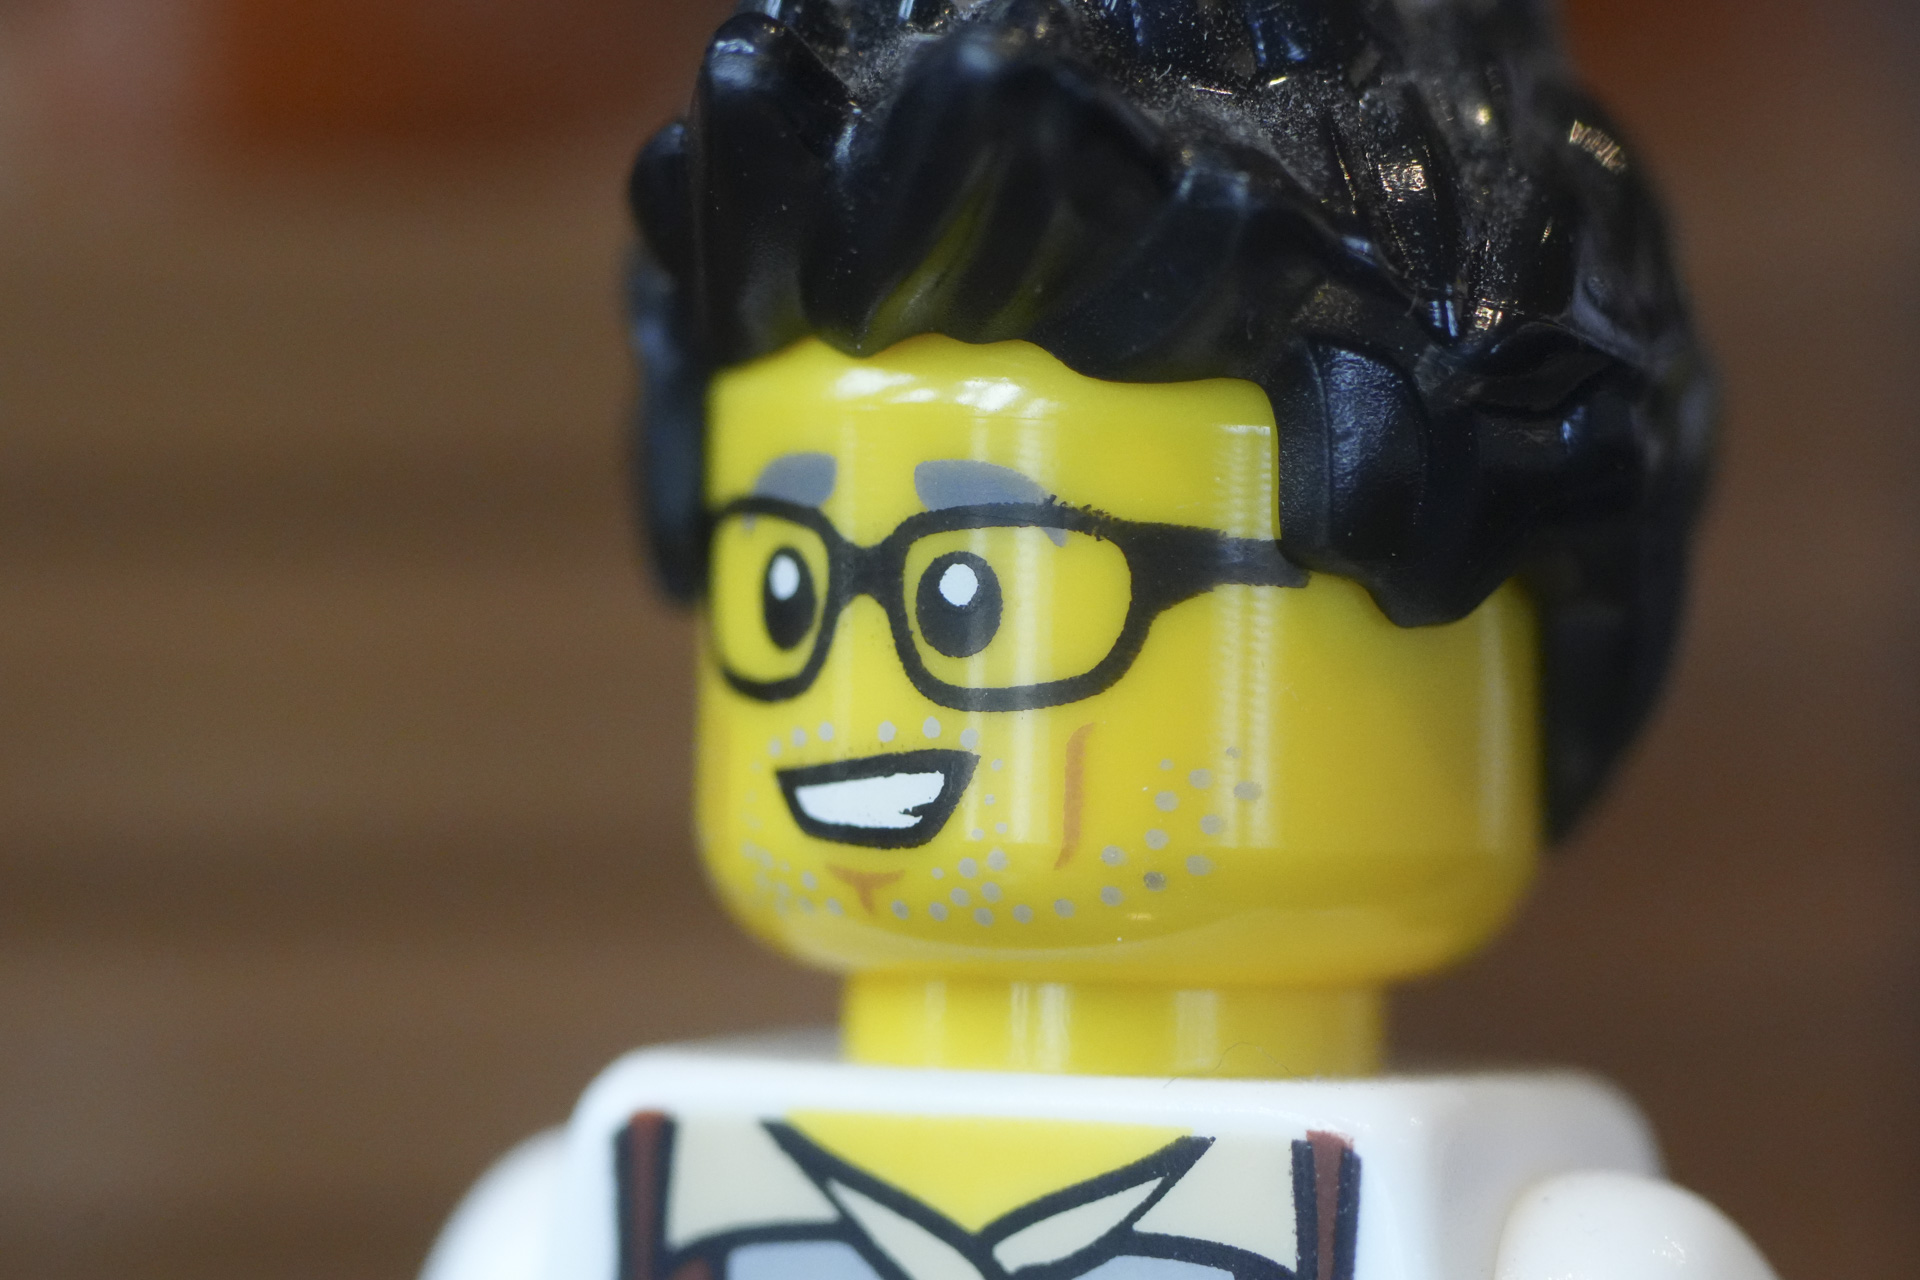 Macro 1.0x magnification of a lego figure, made with the Sony FE 70-200mm F4 G OSS II lens and 2x teleconverter